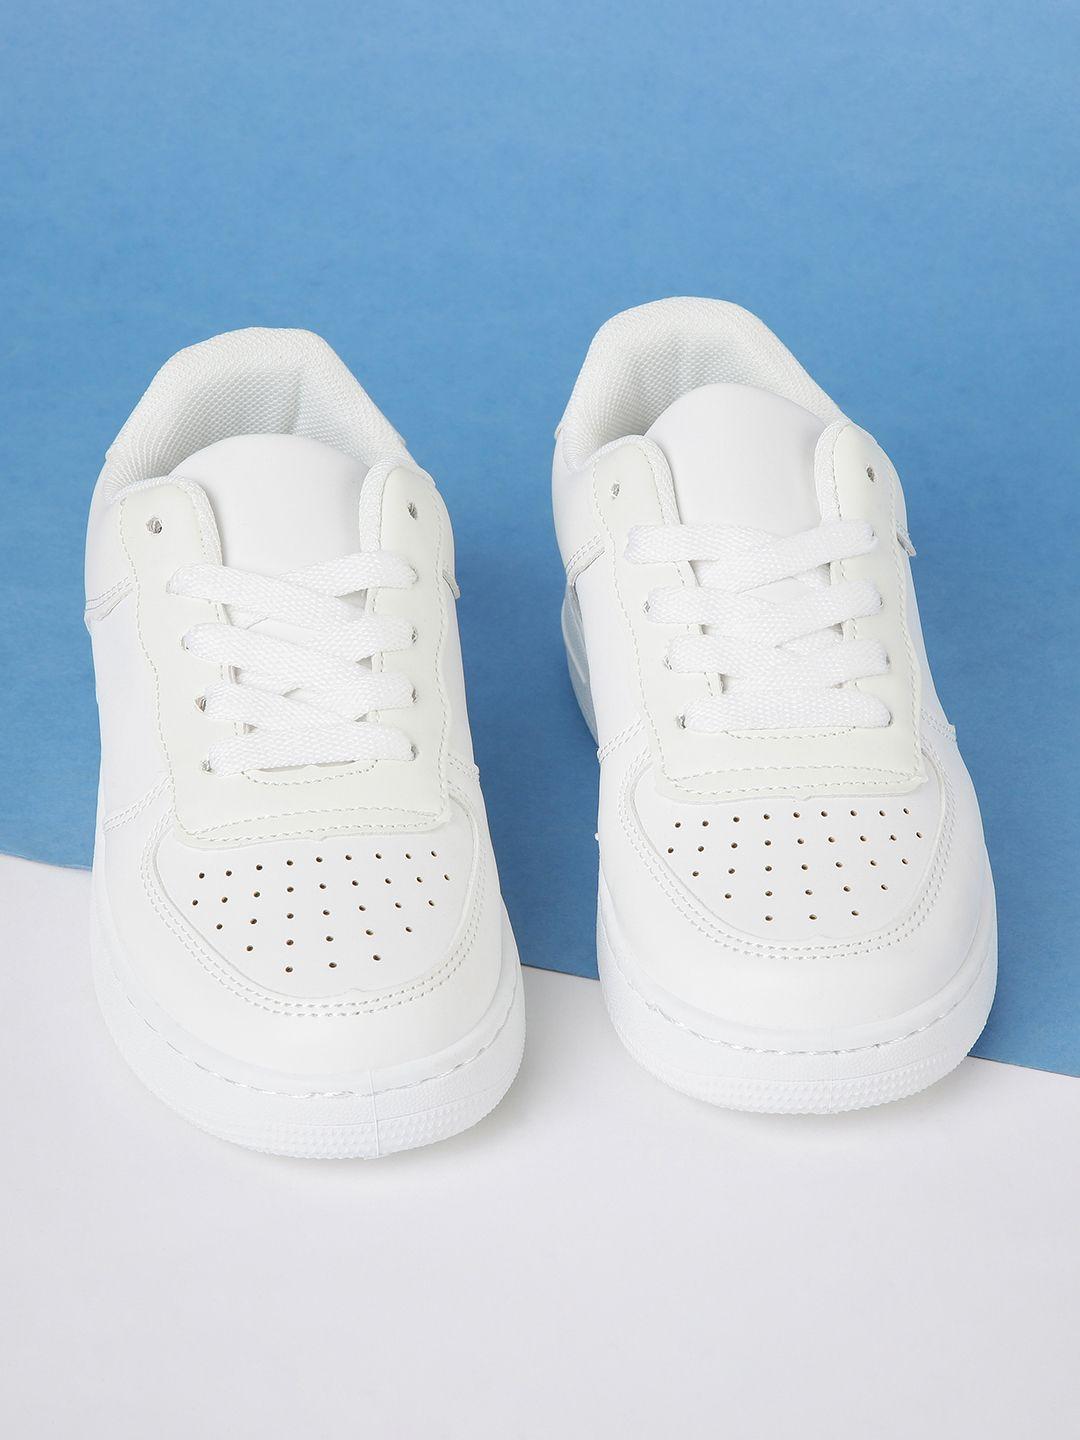 max boys white perforated under sunlight colour changing lace-up sneakers